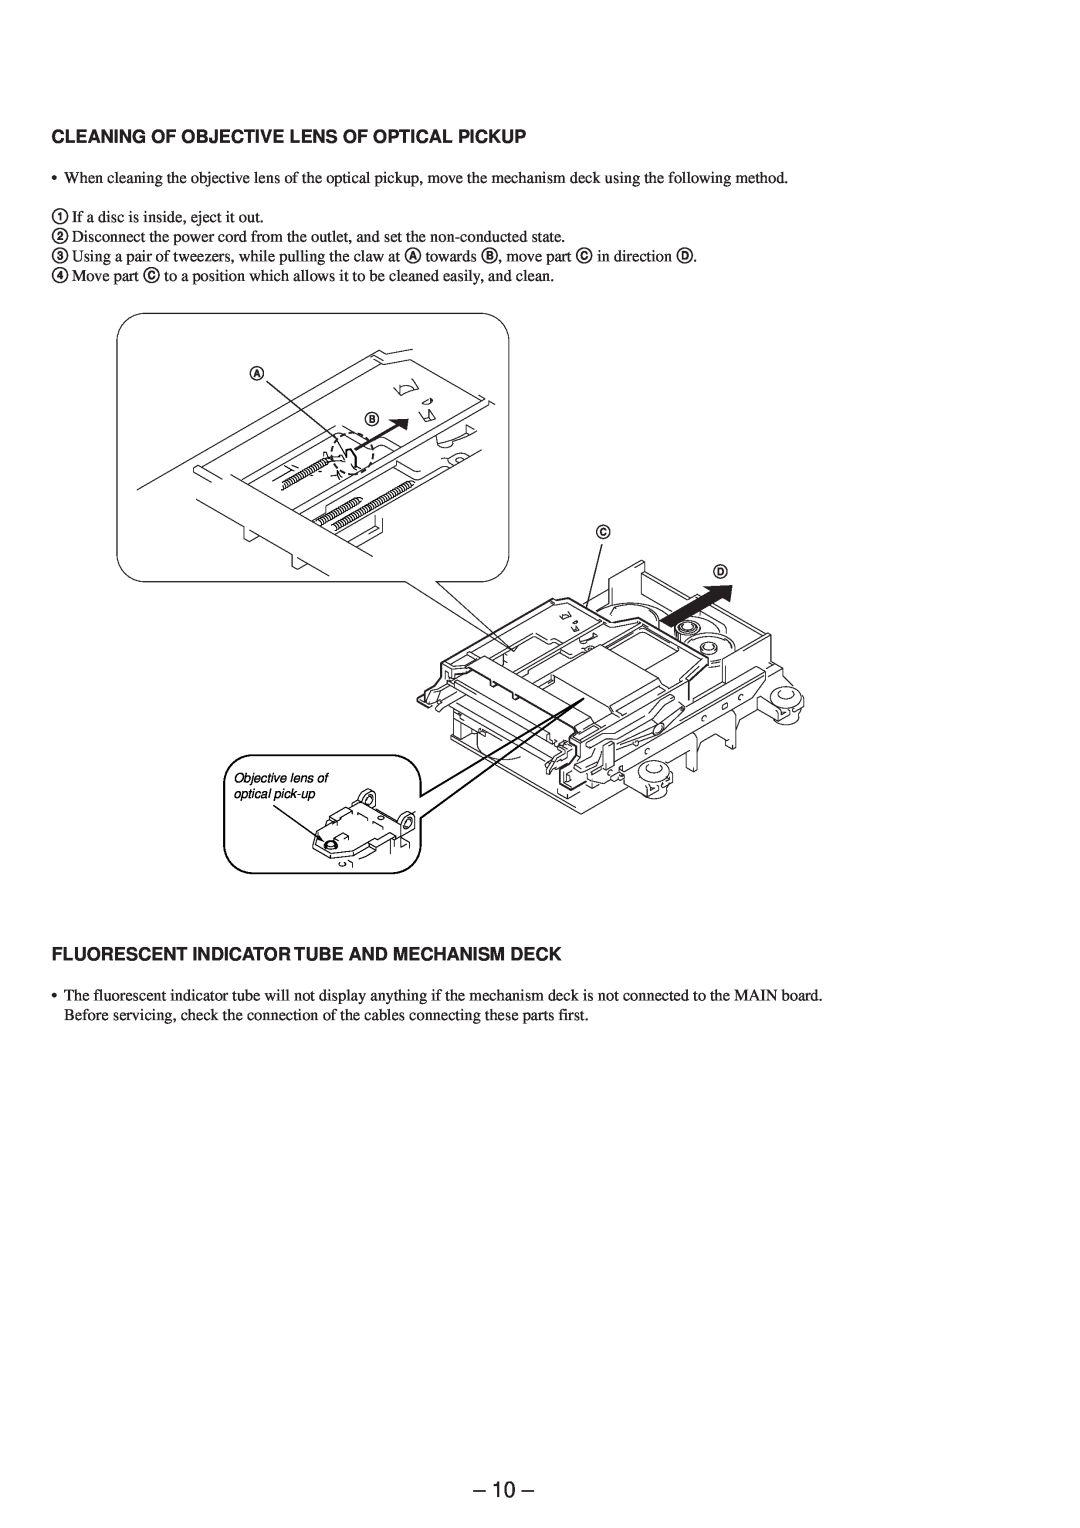 Sony MDS-SD1 service manual Cleaning Of Objective Lens Of Optical Pickup, Fluorescent Indicator Tube And Mechanism Deck 